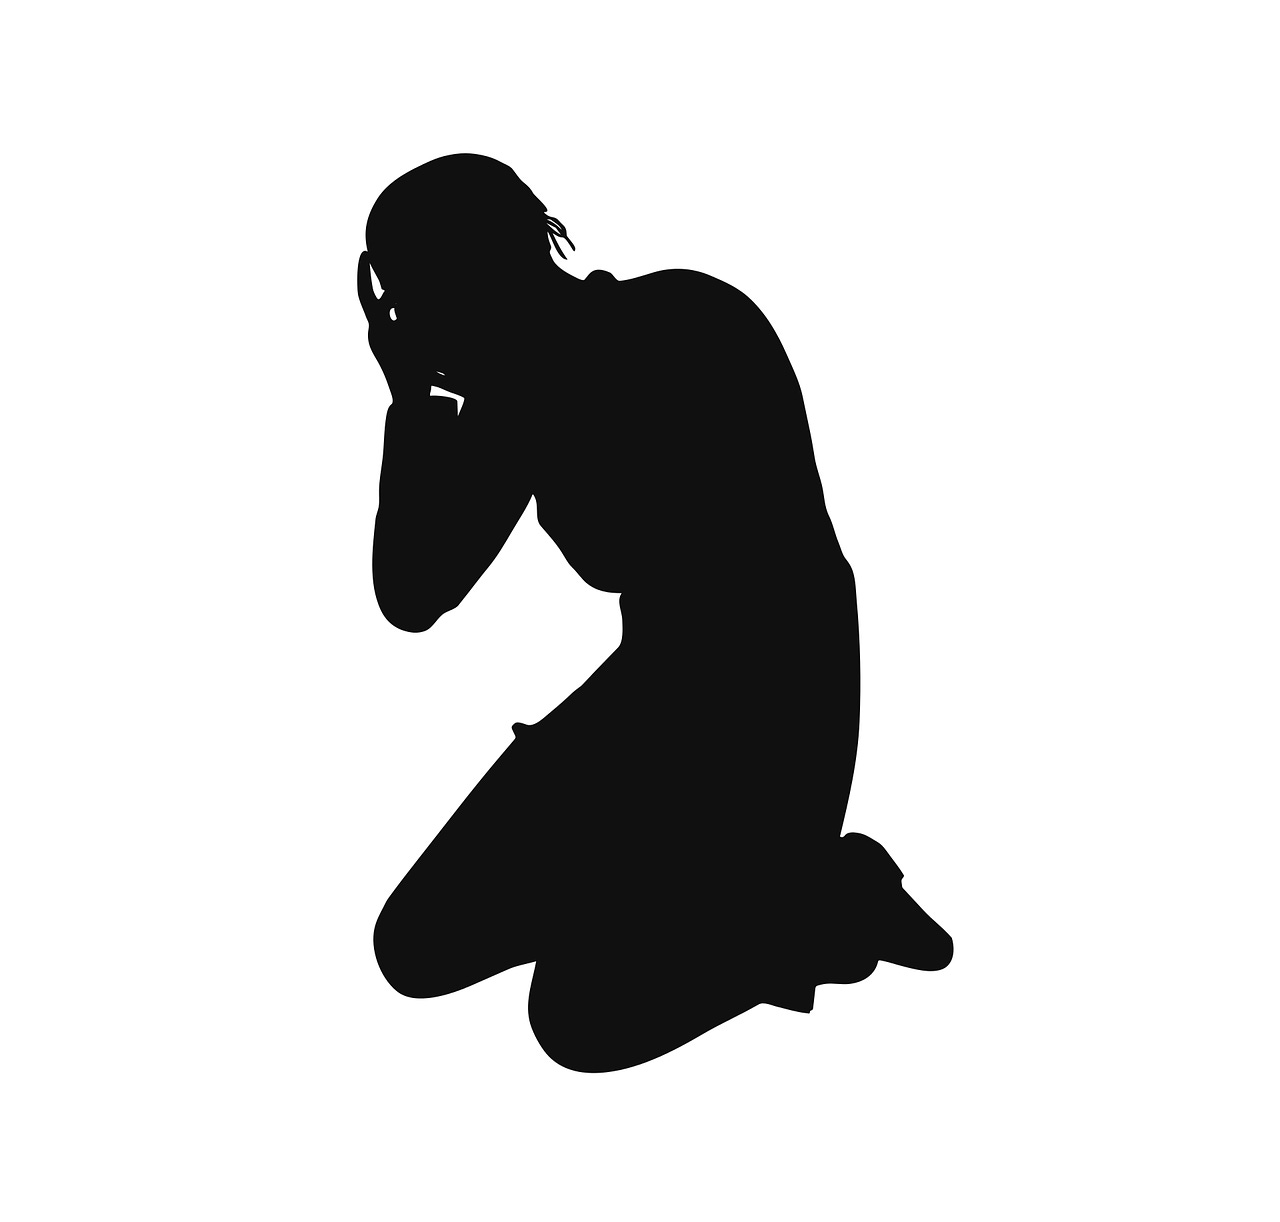 Silhouette of a person on their knees with their head in their hands.